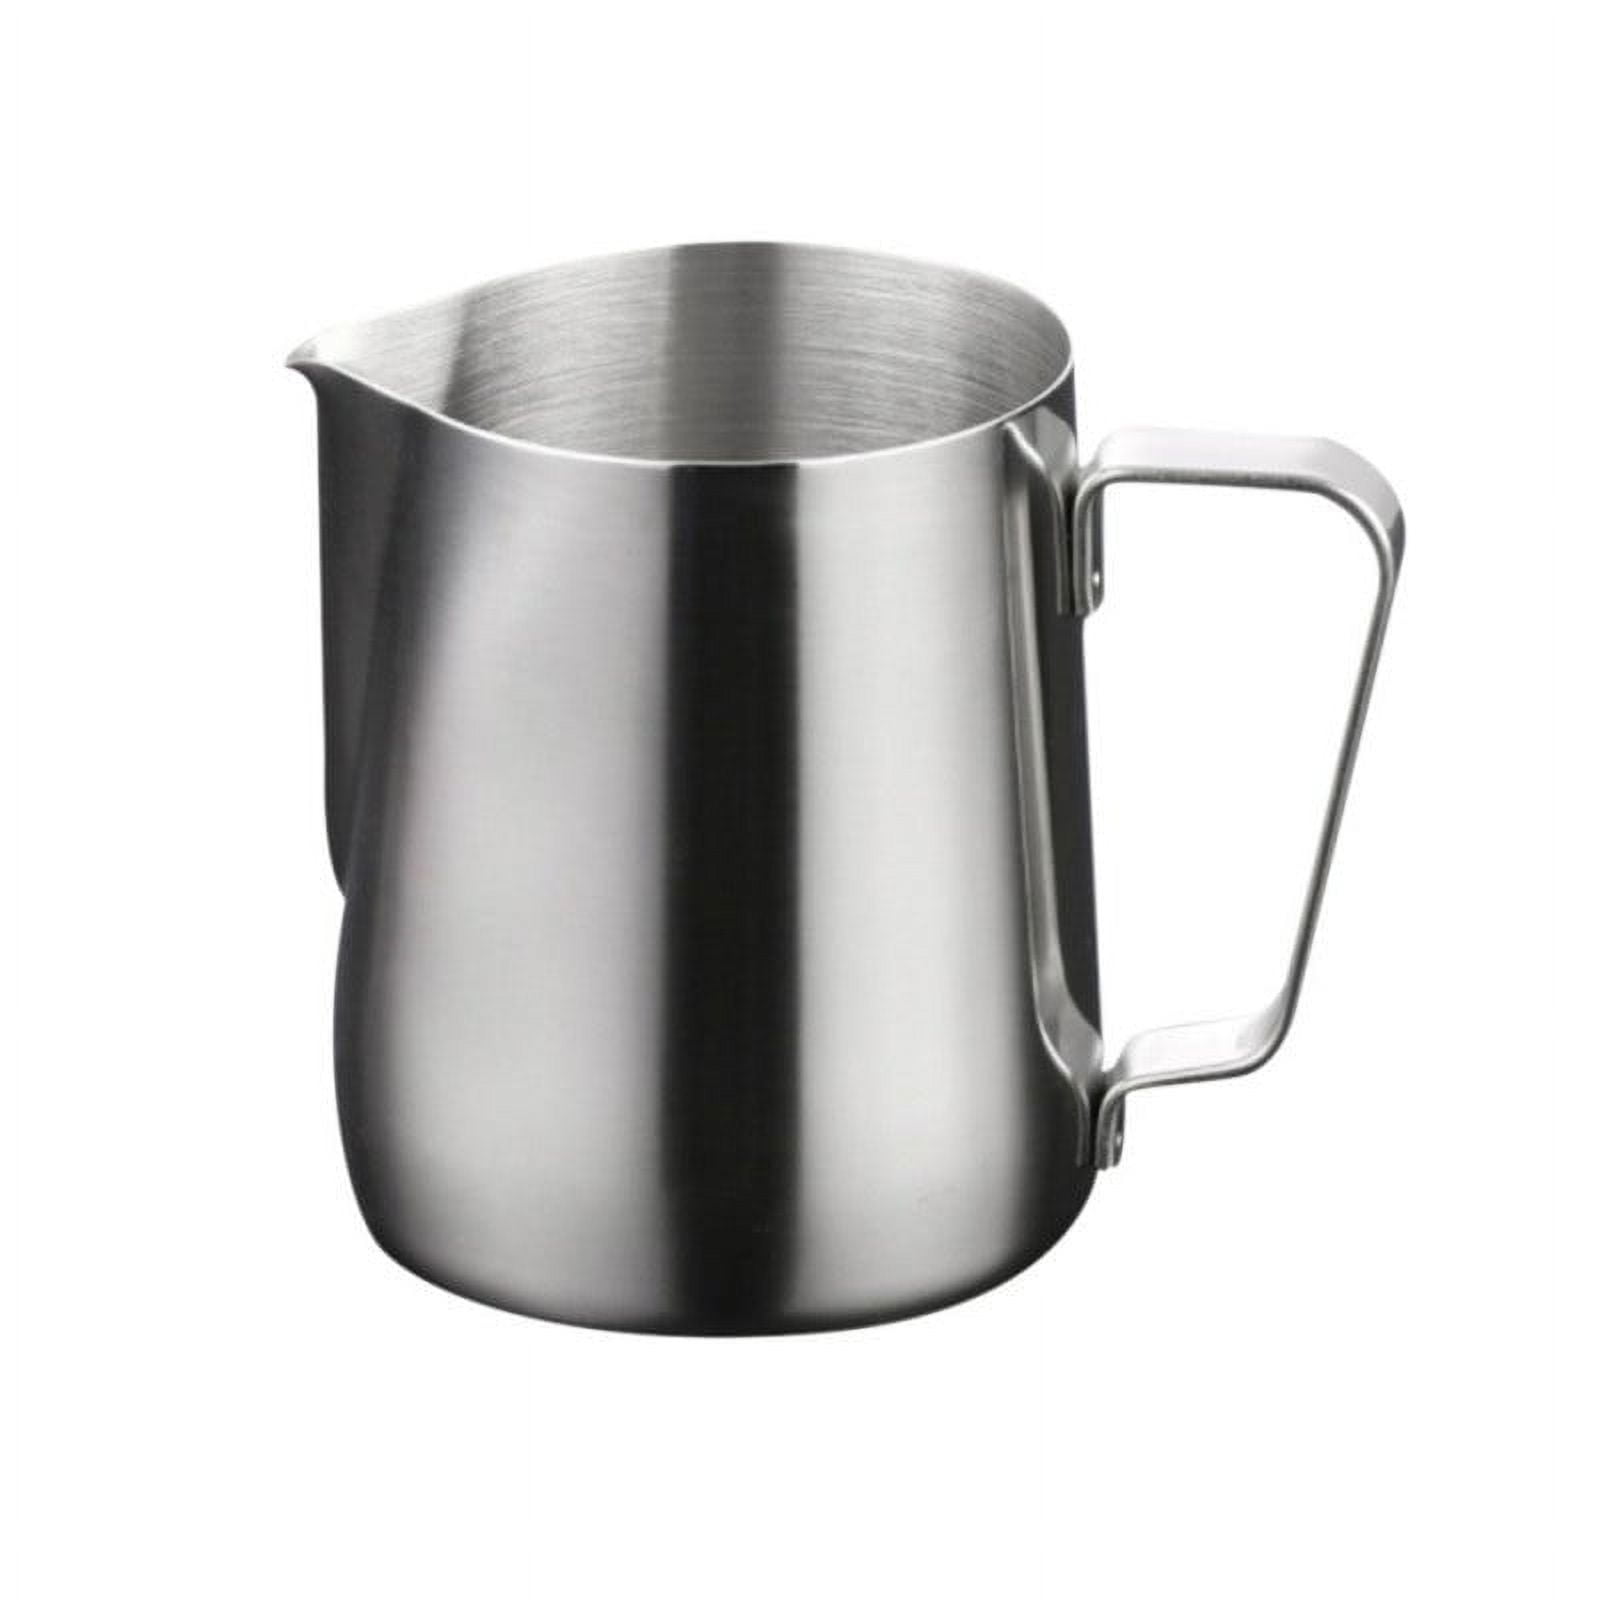 Stainless Steel Latte Art Pitcher Milk Frothing Jug Espresso Coffee Mug Barista Craft Coffee Cappuccino Cups Pot Tools